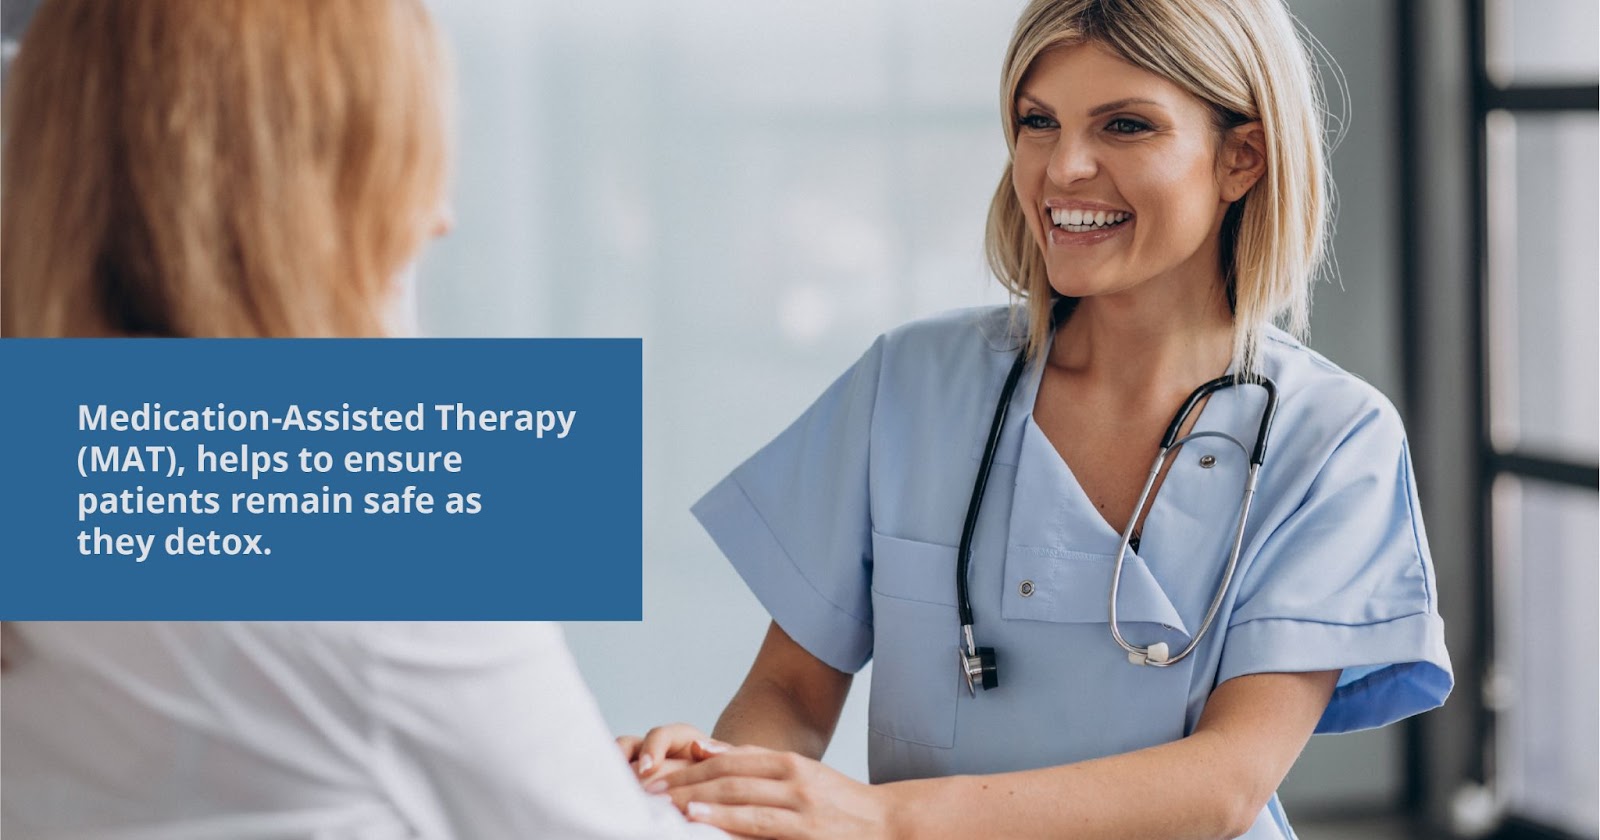 Medication assisted therapy helps to ensure patients remain safe as they detox alcohol rehab drug rehab 